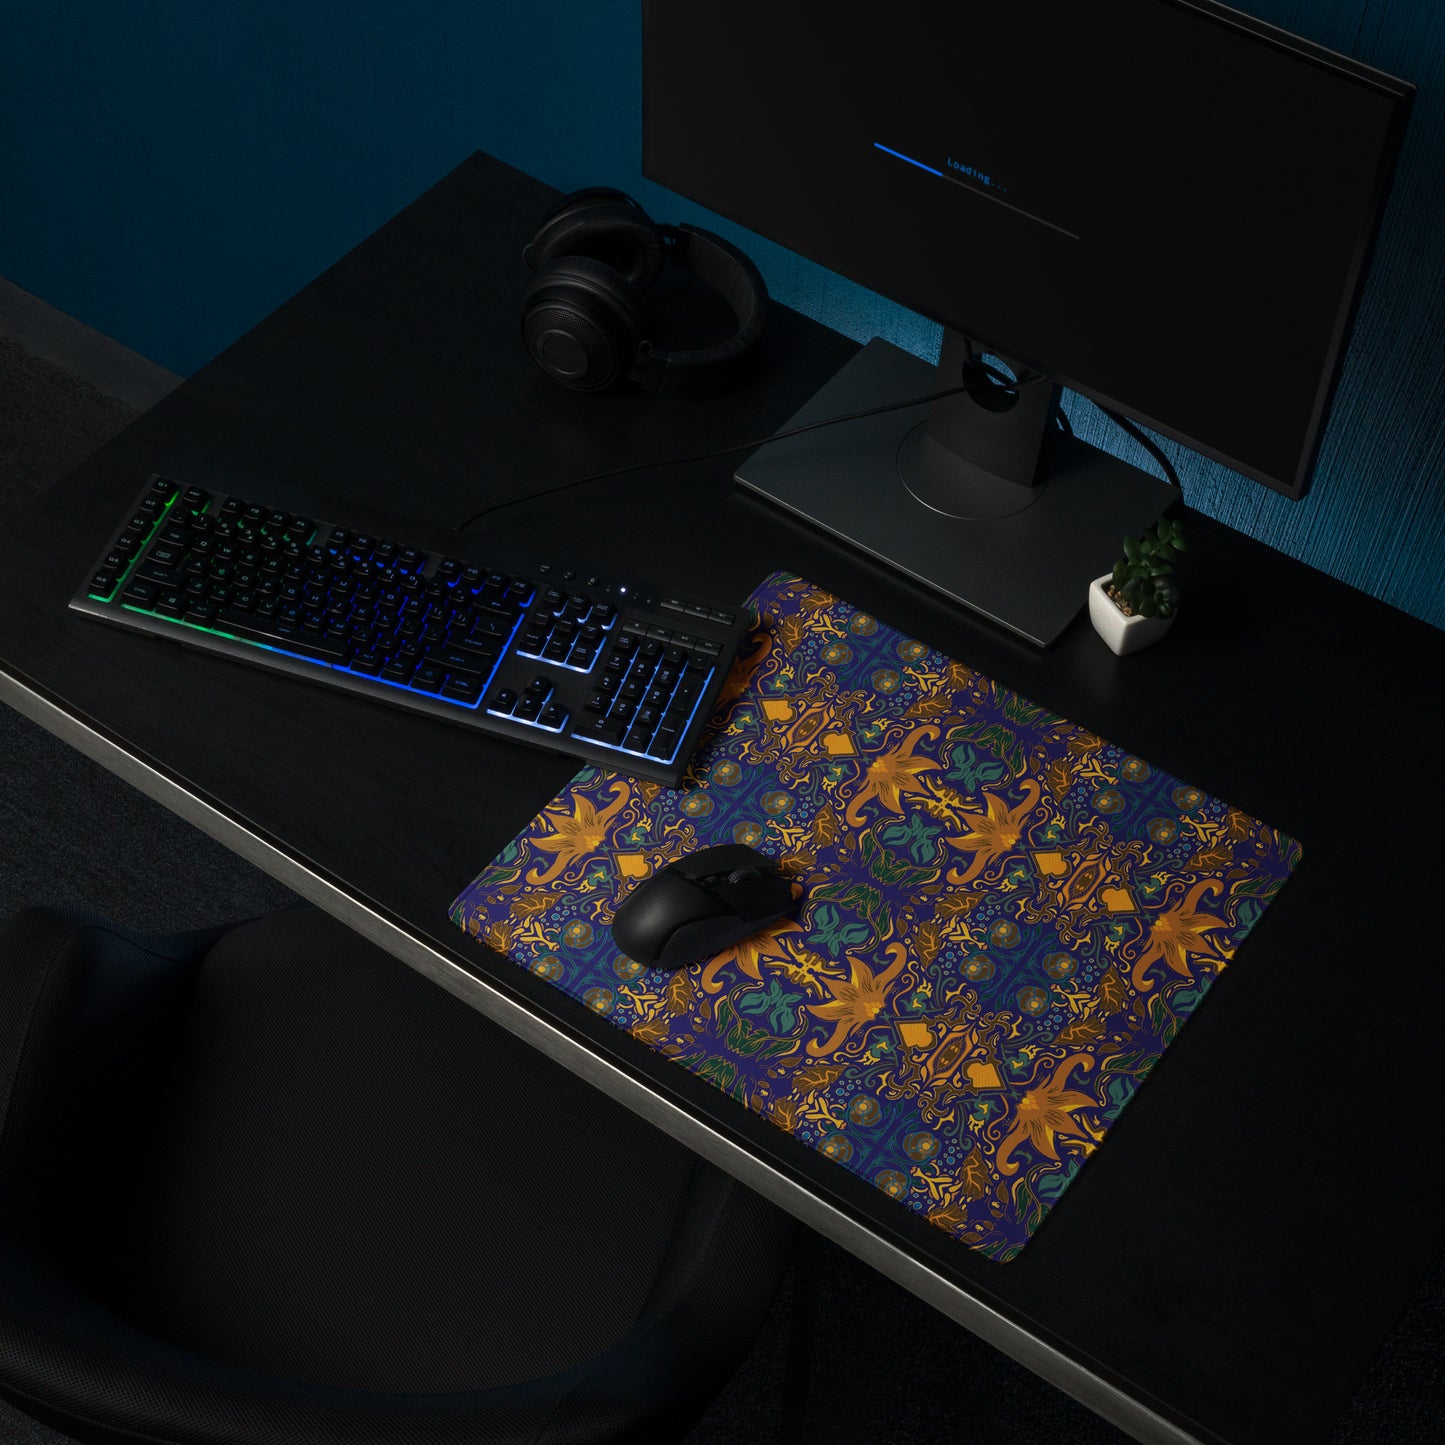 Fawn#2 Gaming mouse pad